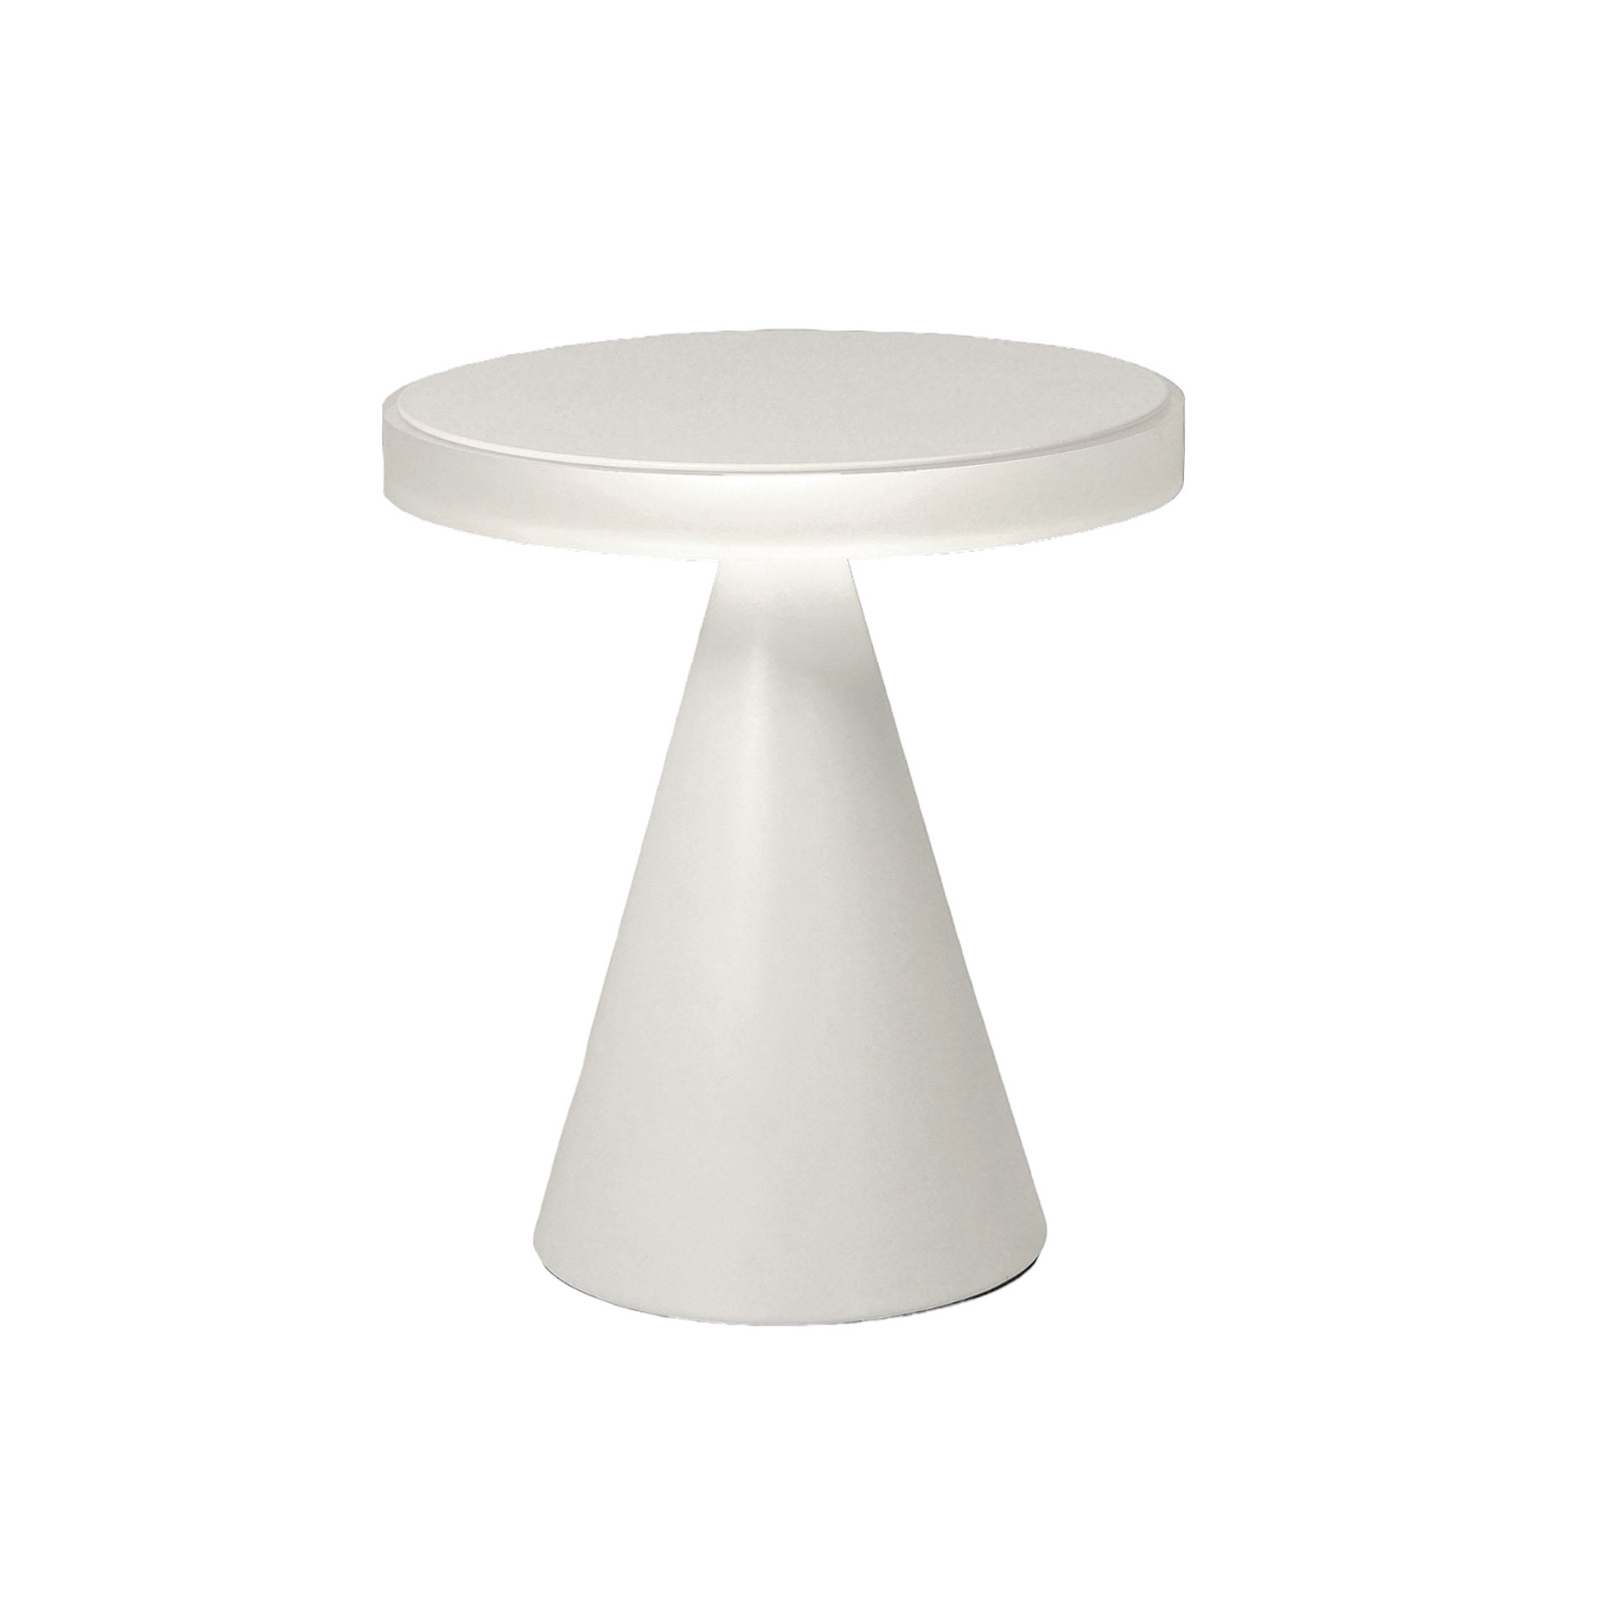 Neutra LED table lamp, height 27 cm, white, touch dimmer